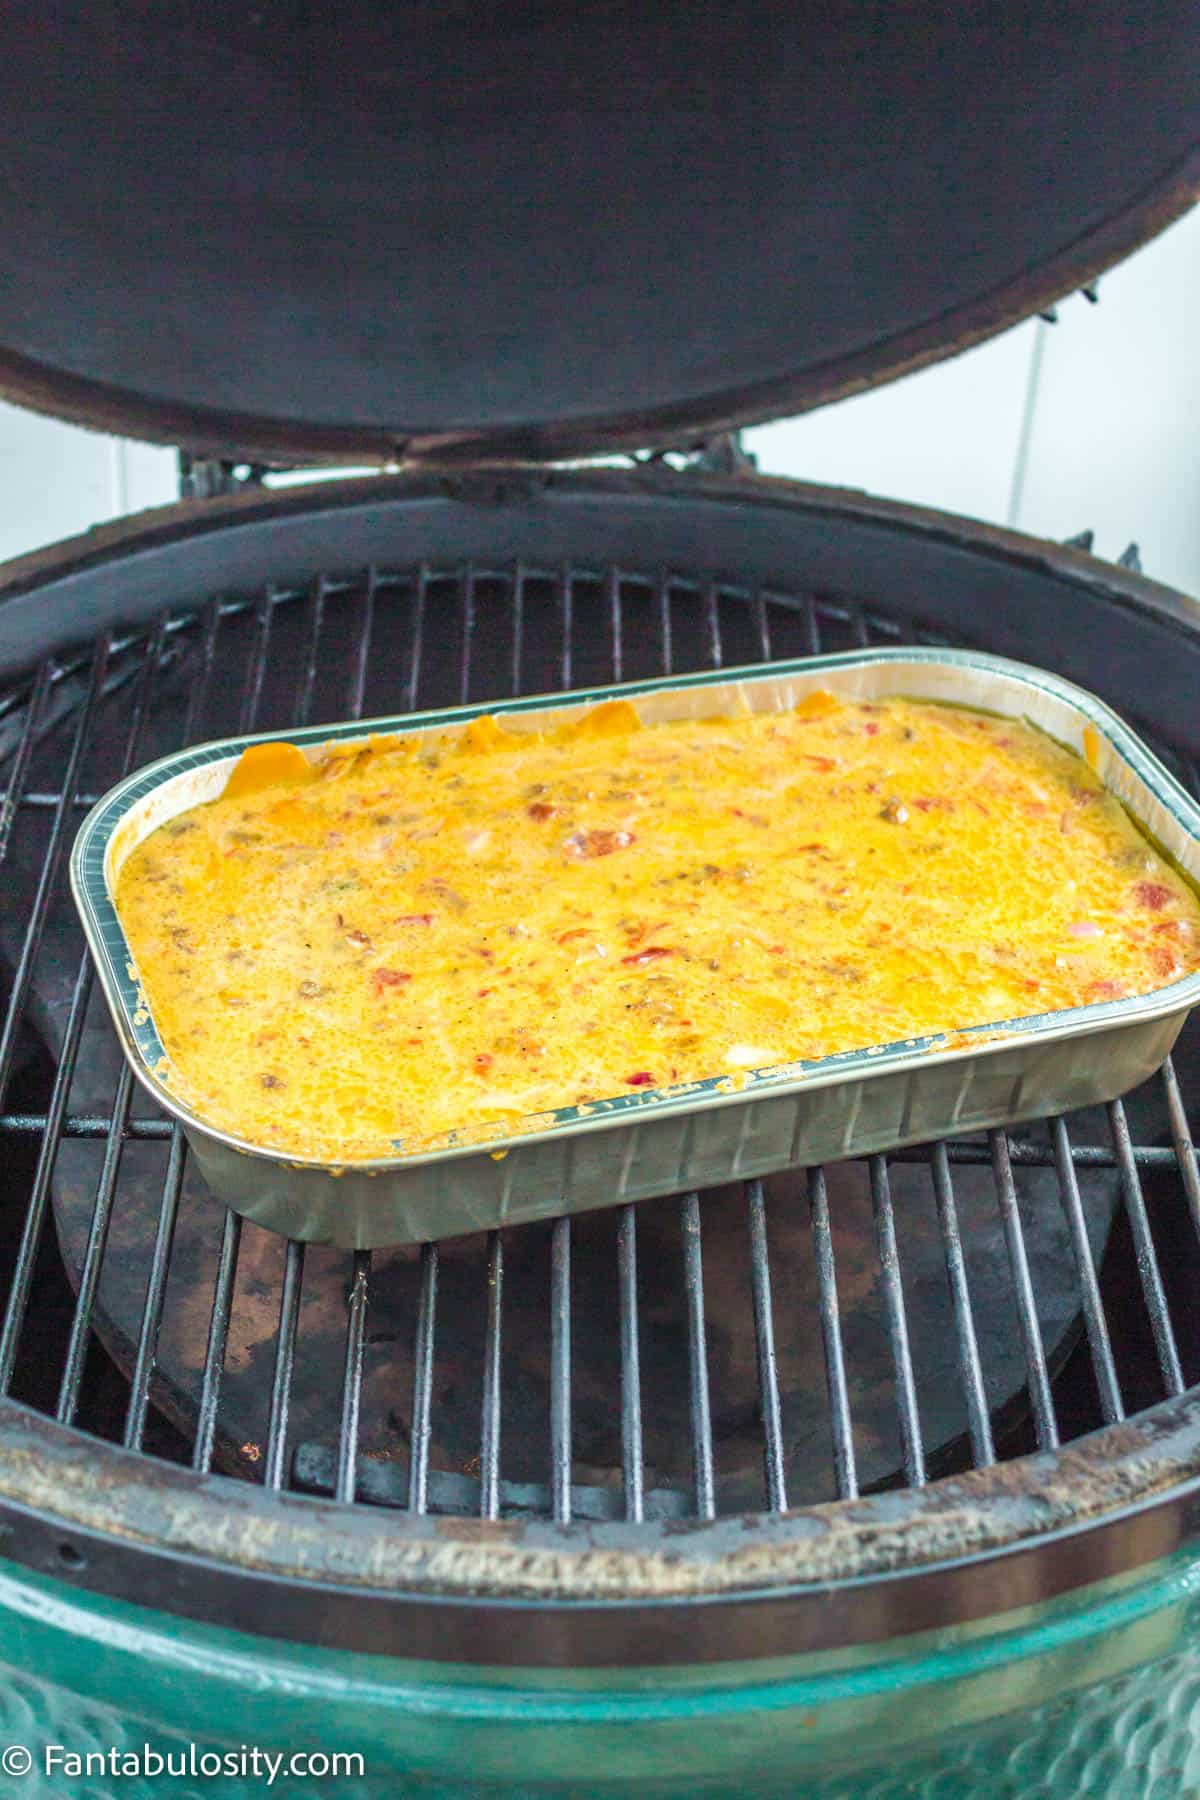 The cooked smoked queso sitting on the charcoal grill.